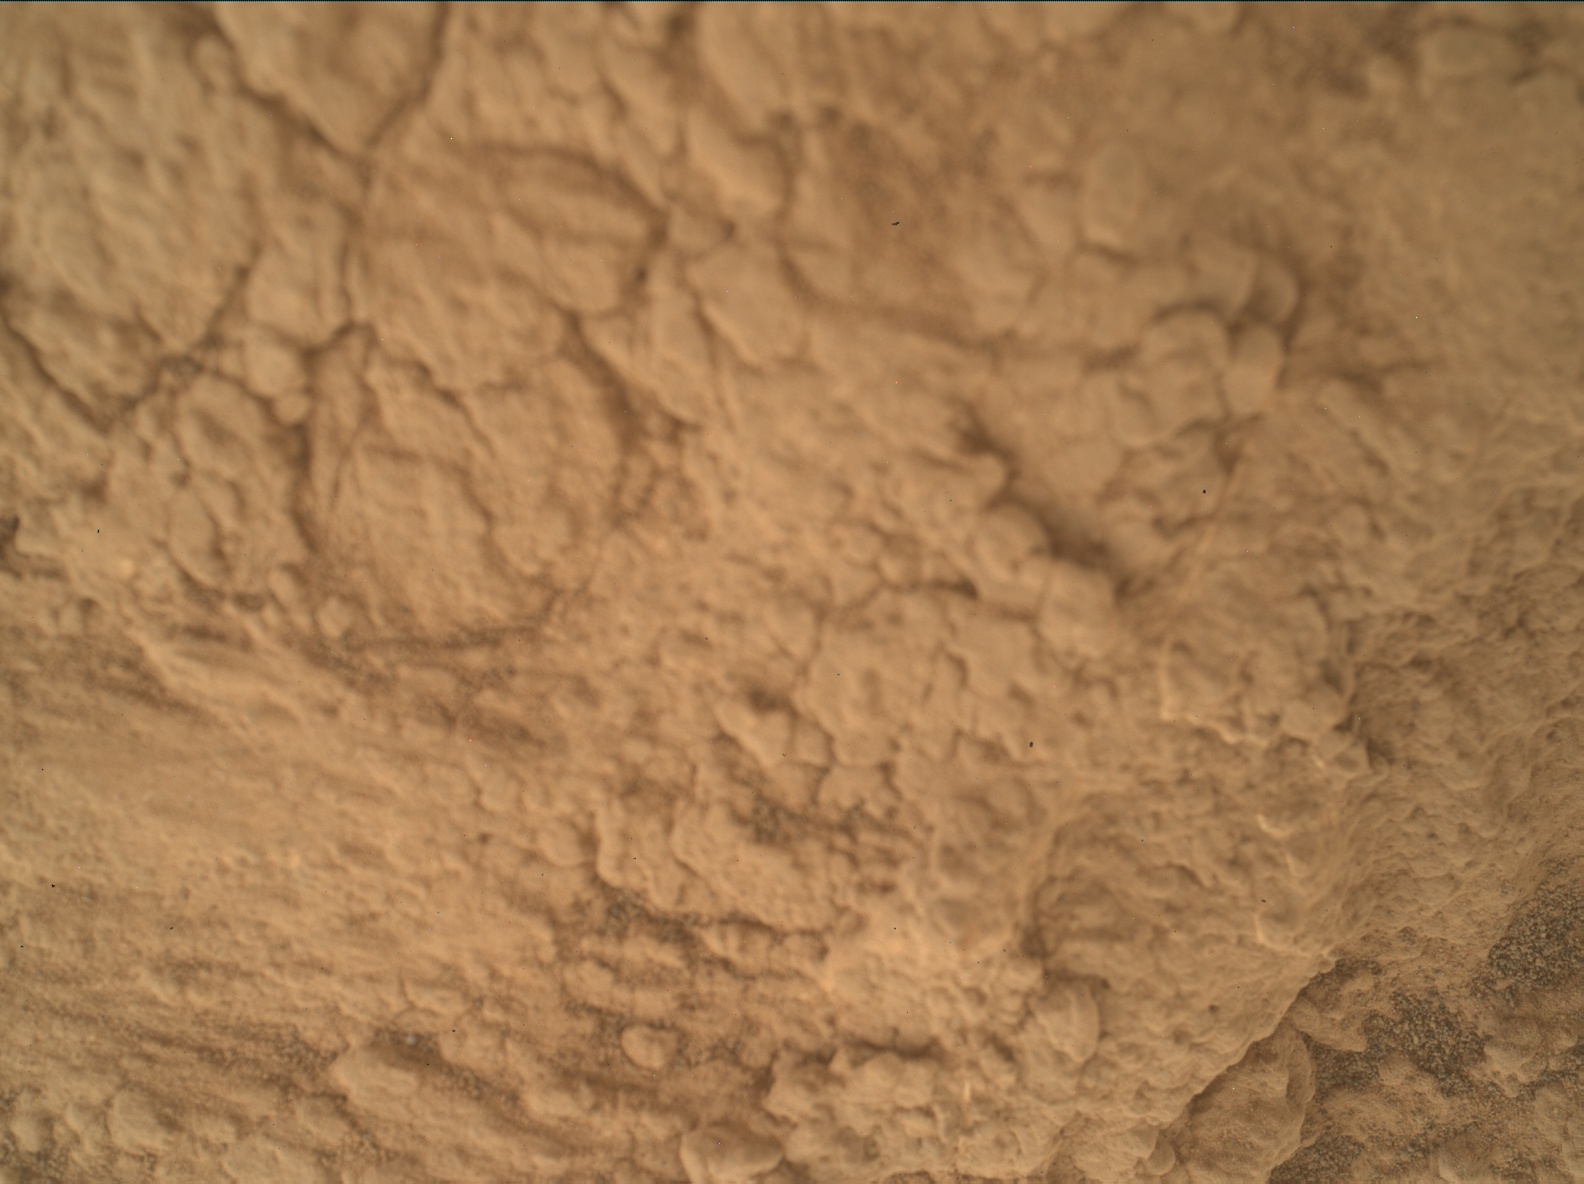 Nasa's Mars rover Curiosity acquired this image using its Mars Hand Lens Imager (MAHLI) on Sol 2567